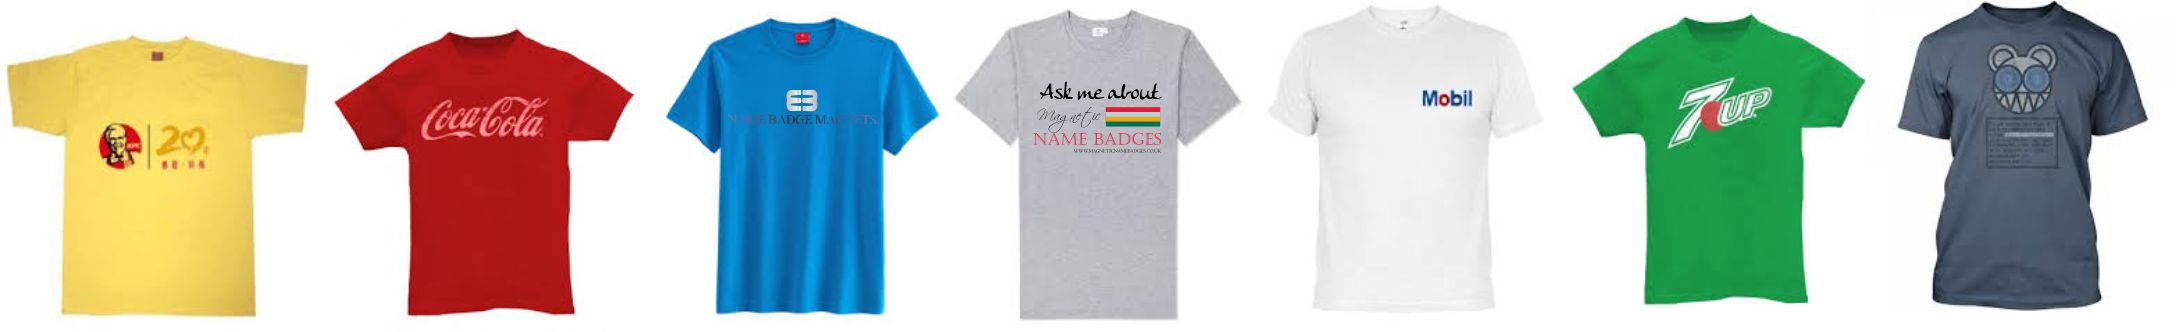 Promotional T Shirts 